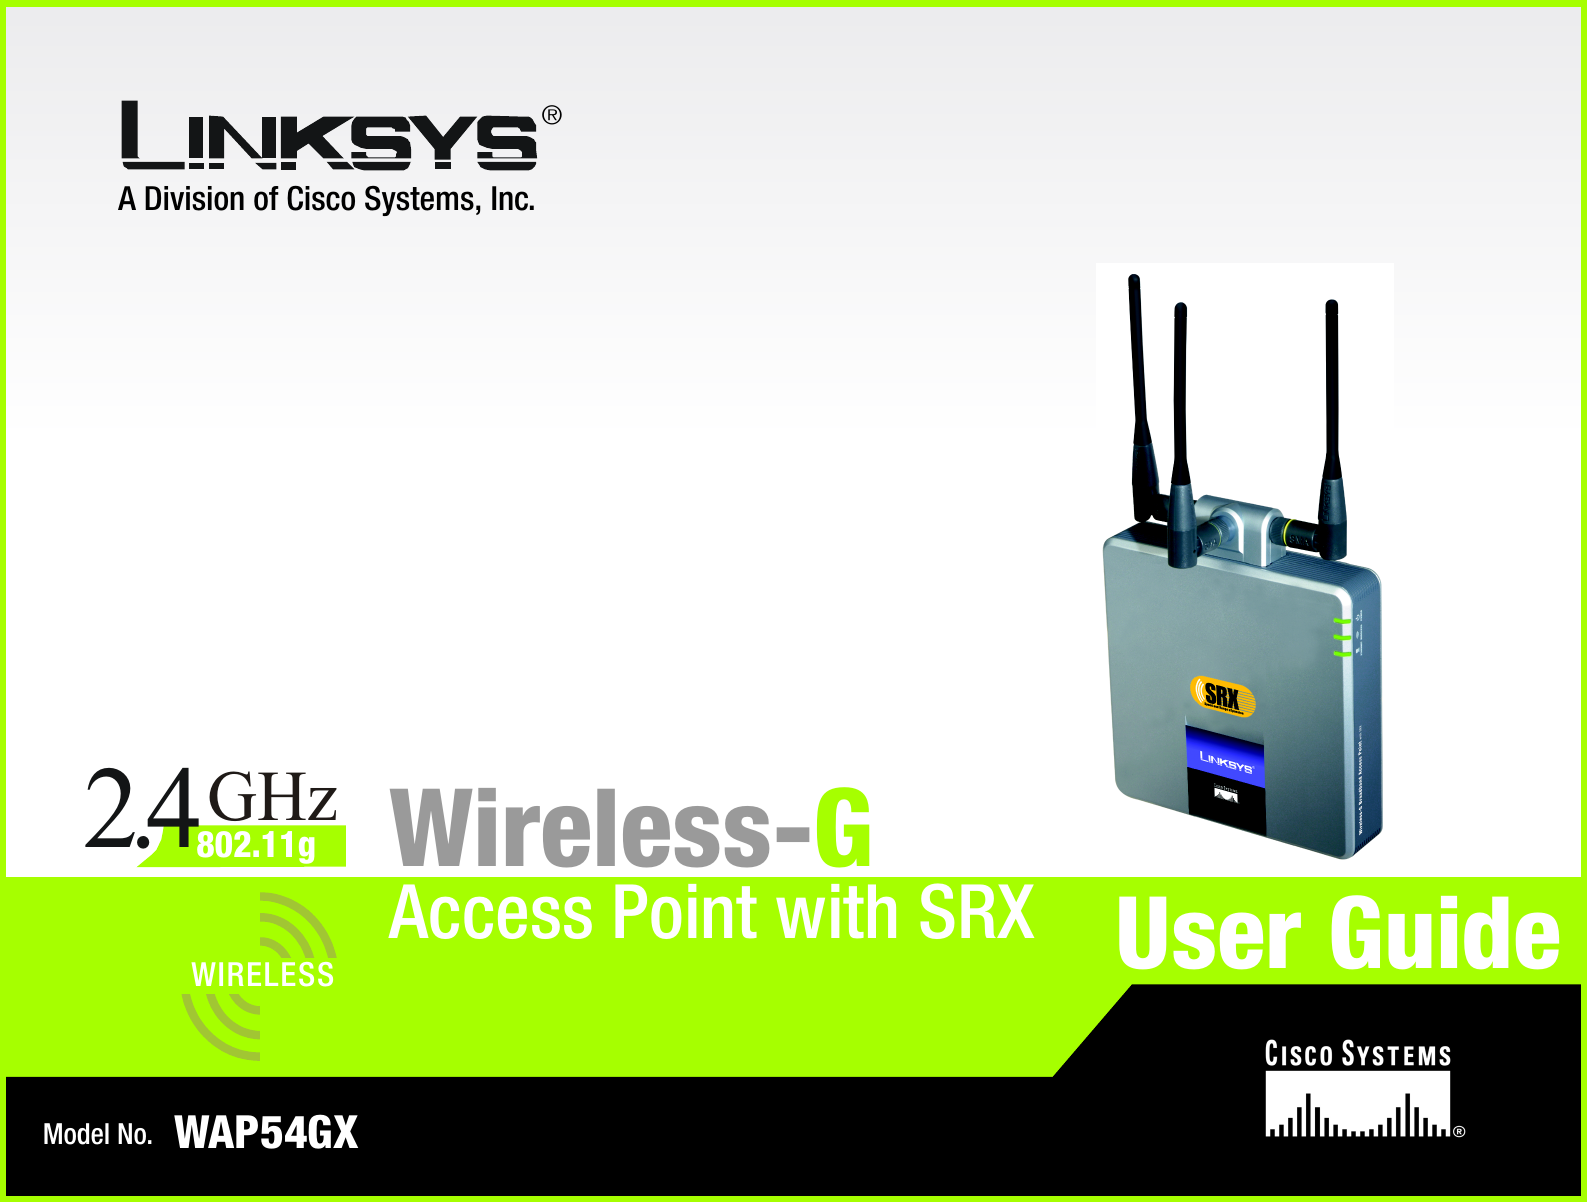 A Division of Cisco Systems, Inc.®Model No.Access Point with SRXWireless-GWAP54GXUser GuideWIRELESSGHz2.4802.11g